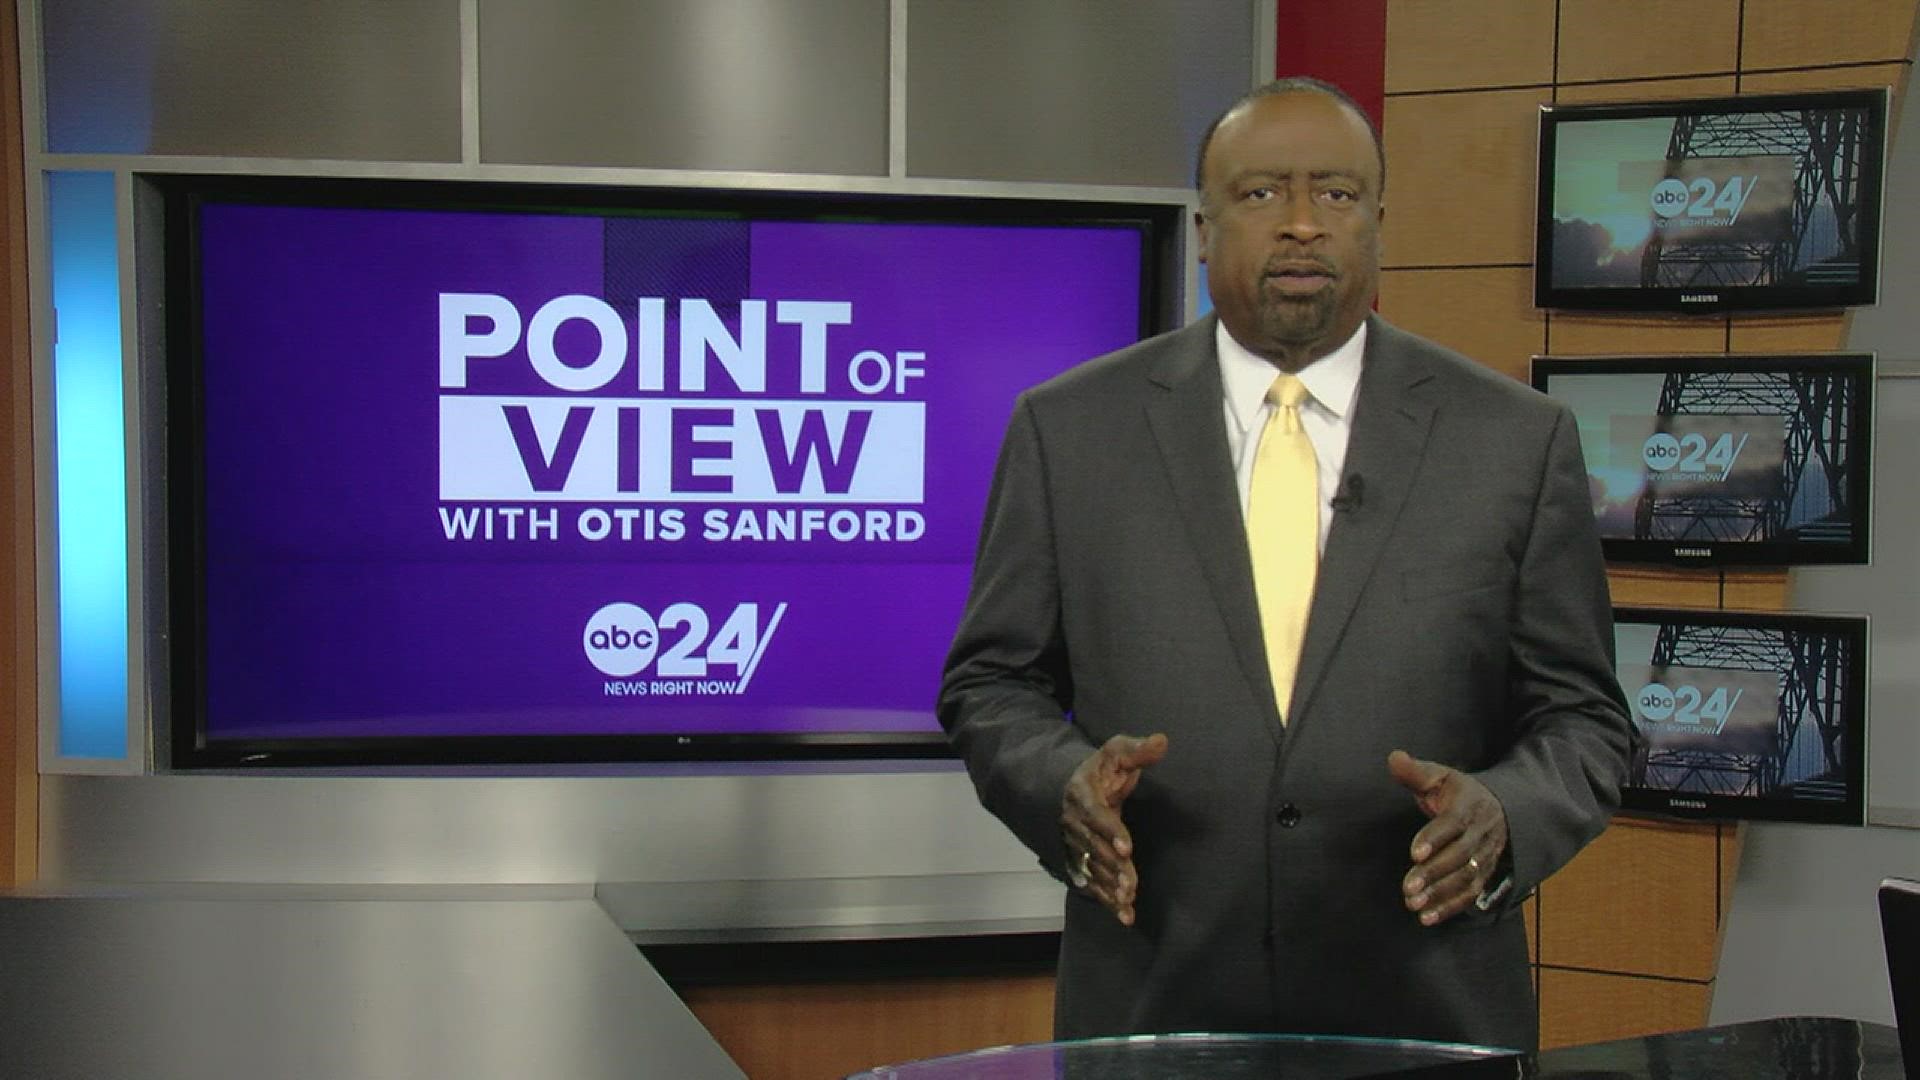 ABC24 political analyst and commentator Otis Sanford shared his point of view on the debate over if MLGW should leave TVA.